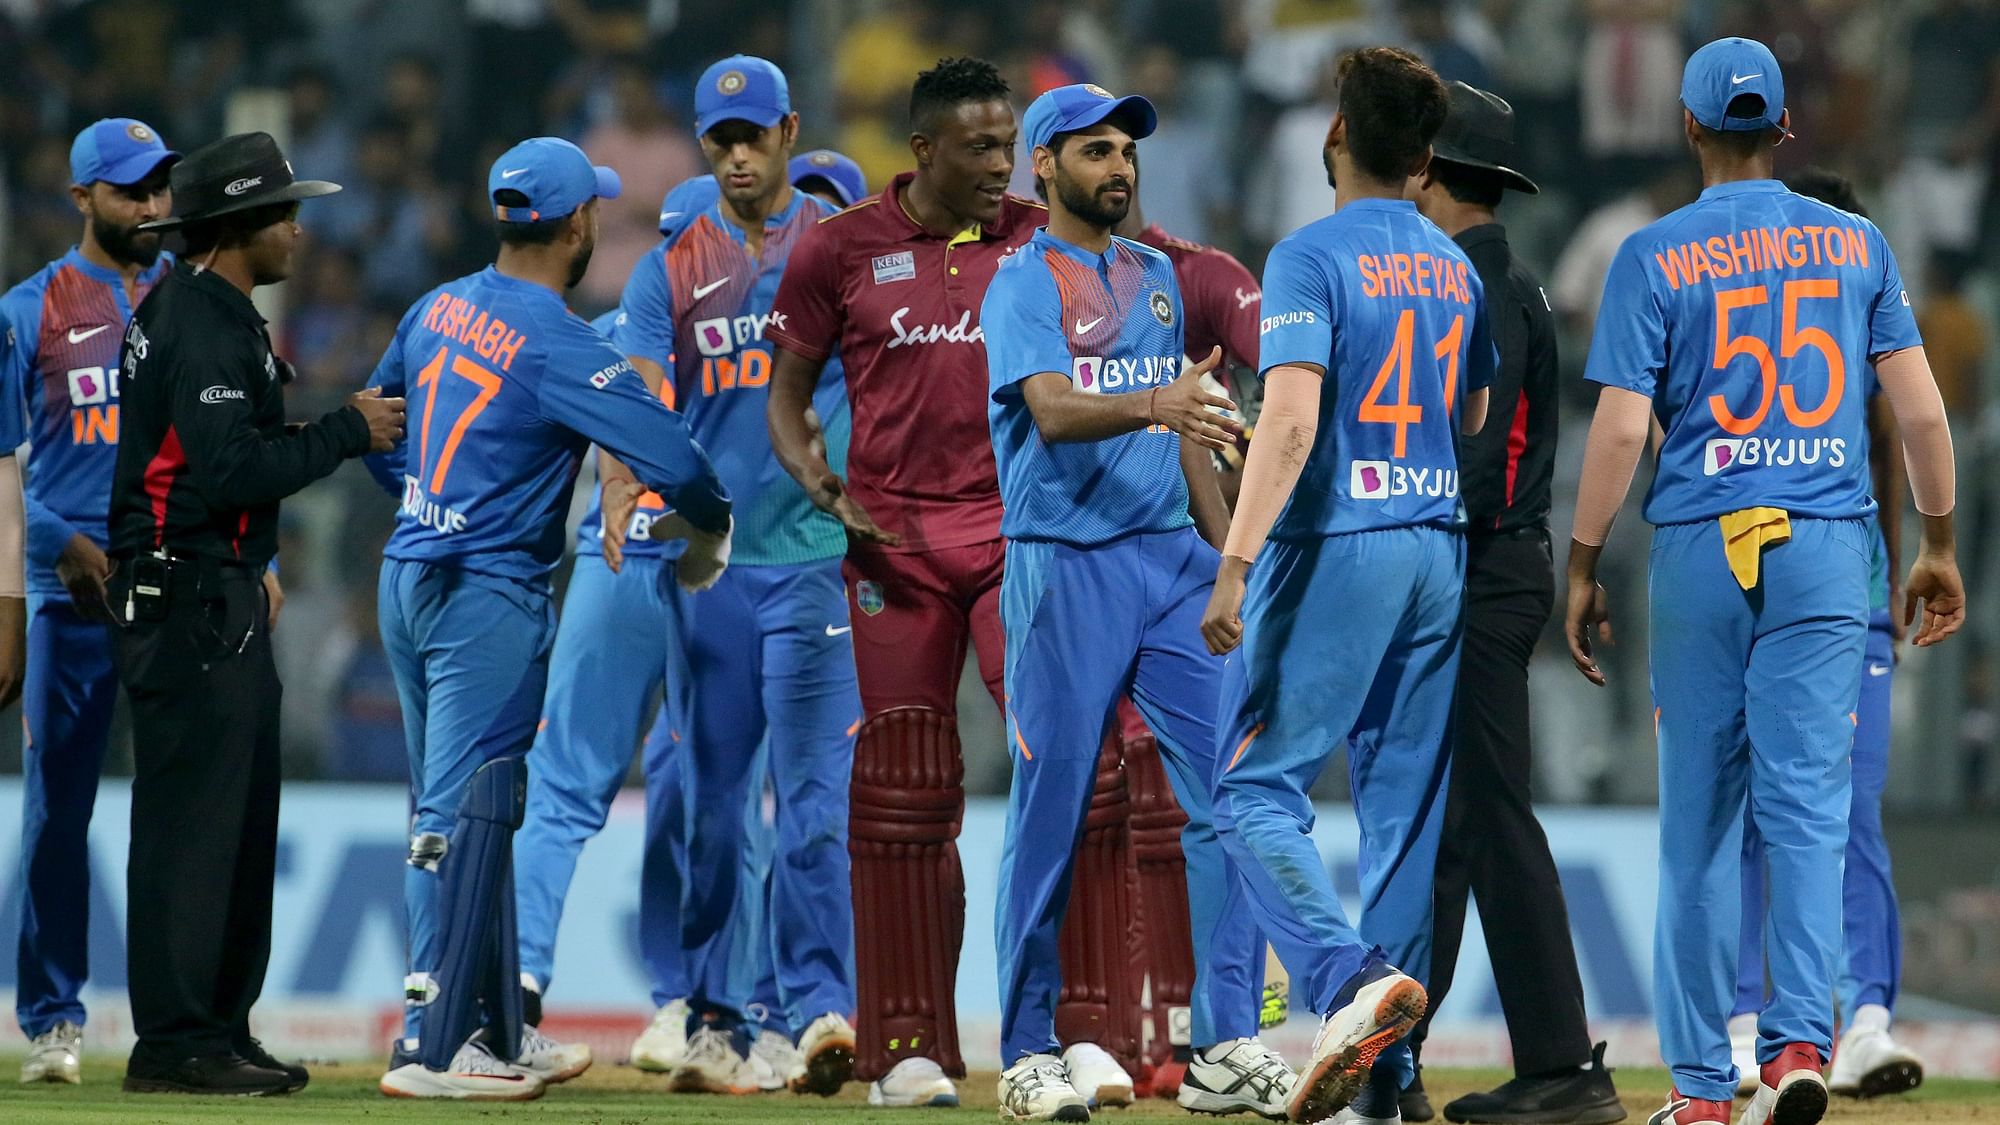 India vs West Indies (IND vs WI) 3rd T20 Dream 11 Live Cricket Score